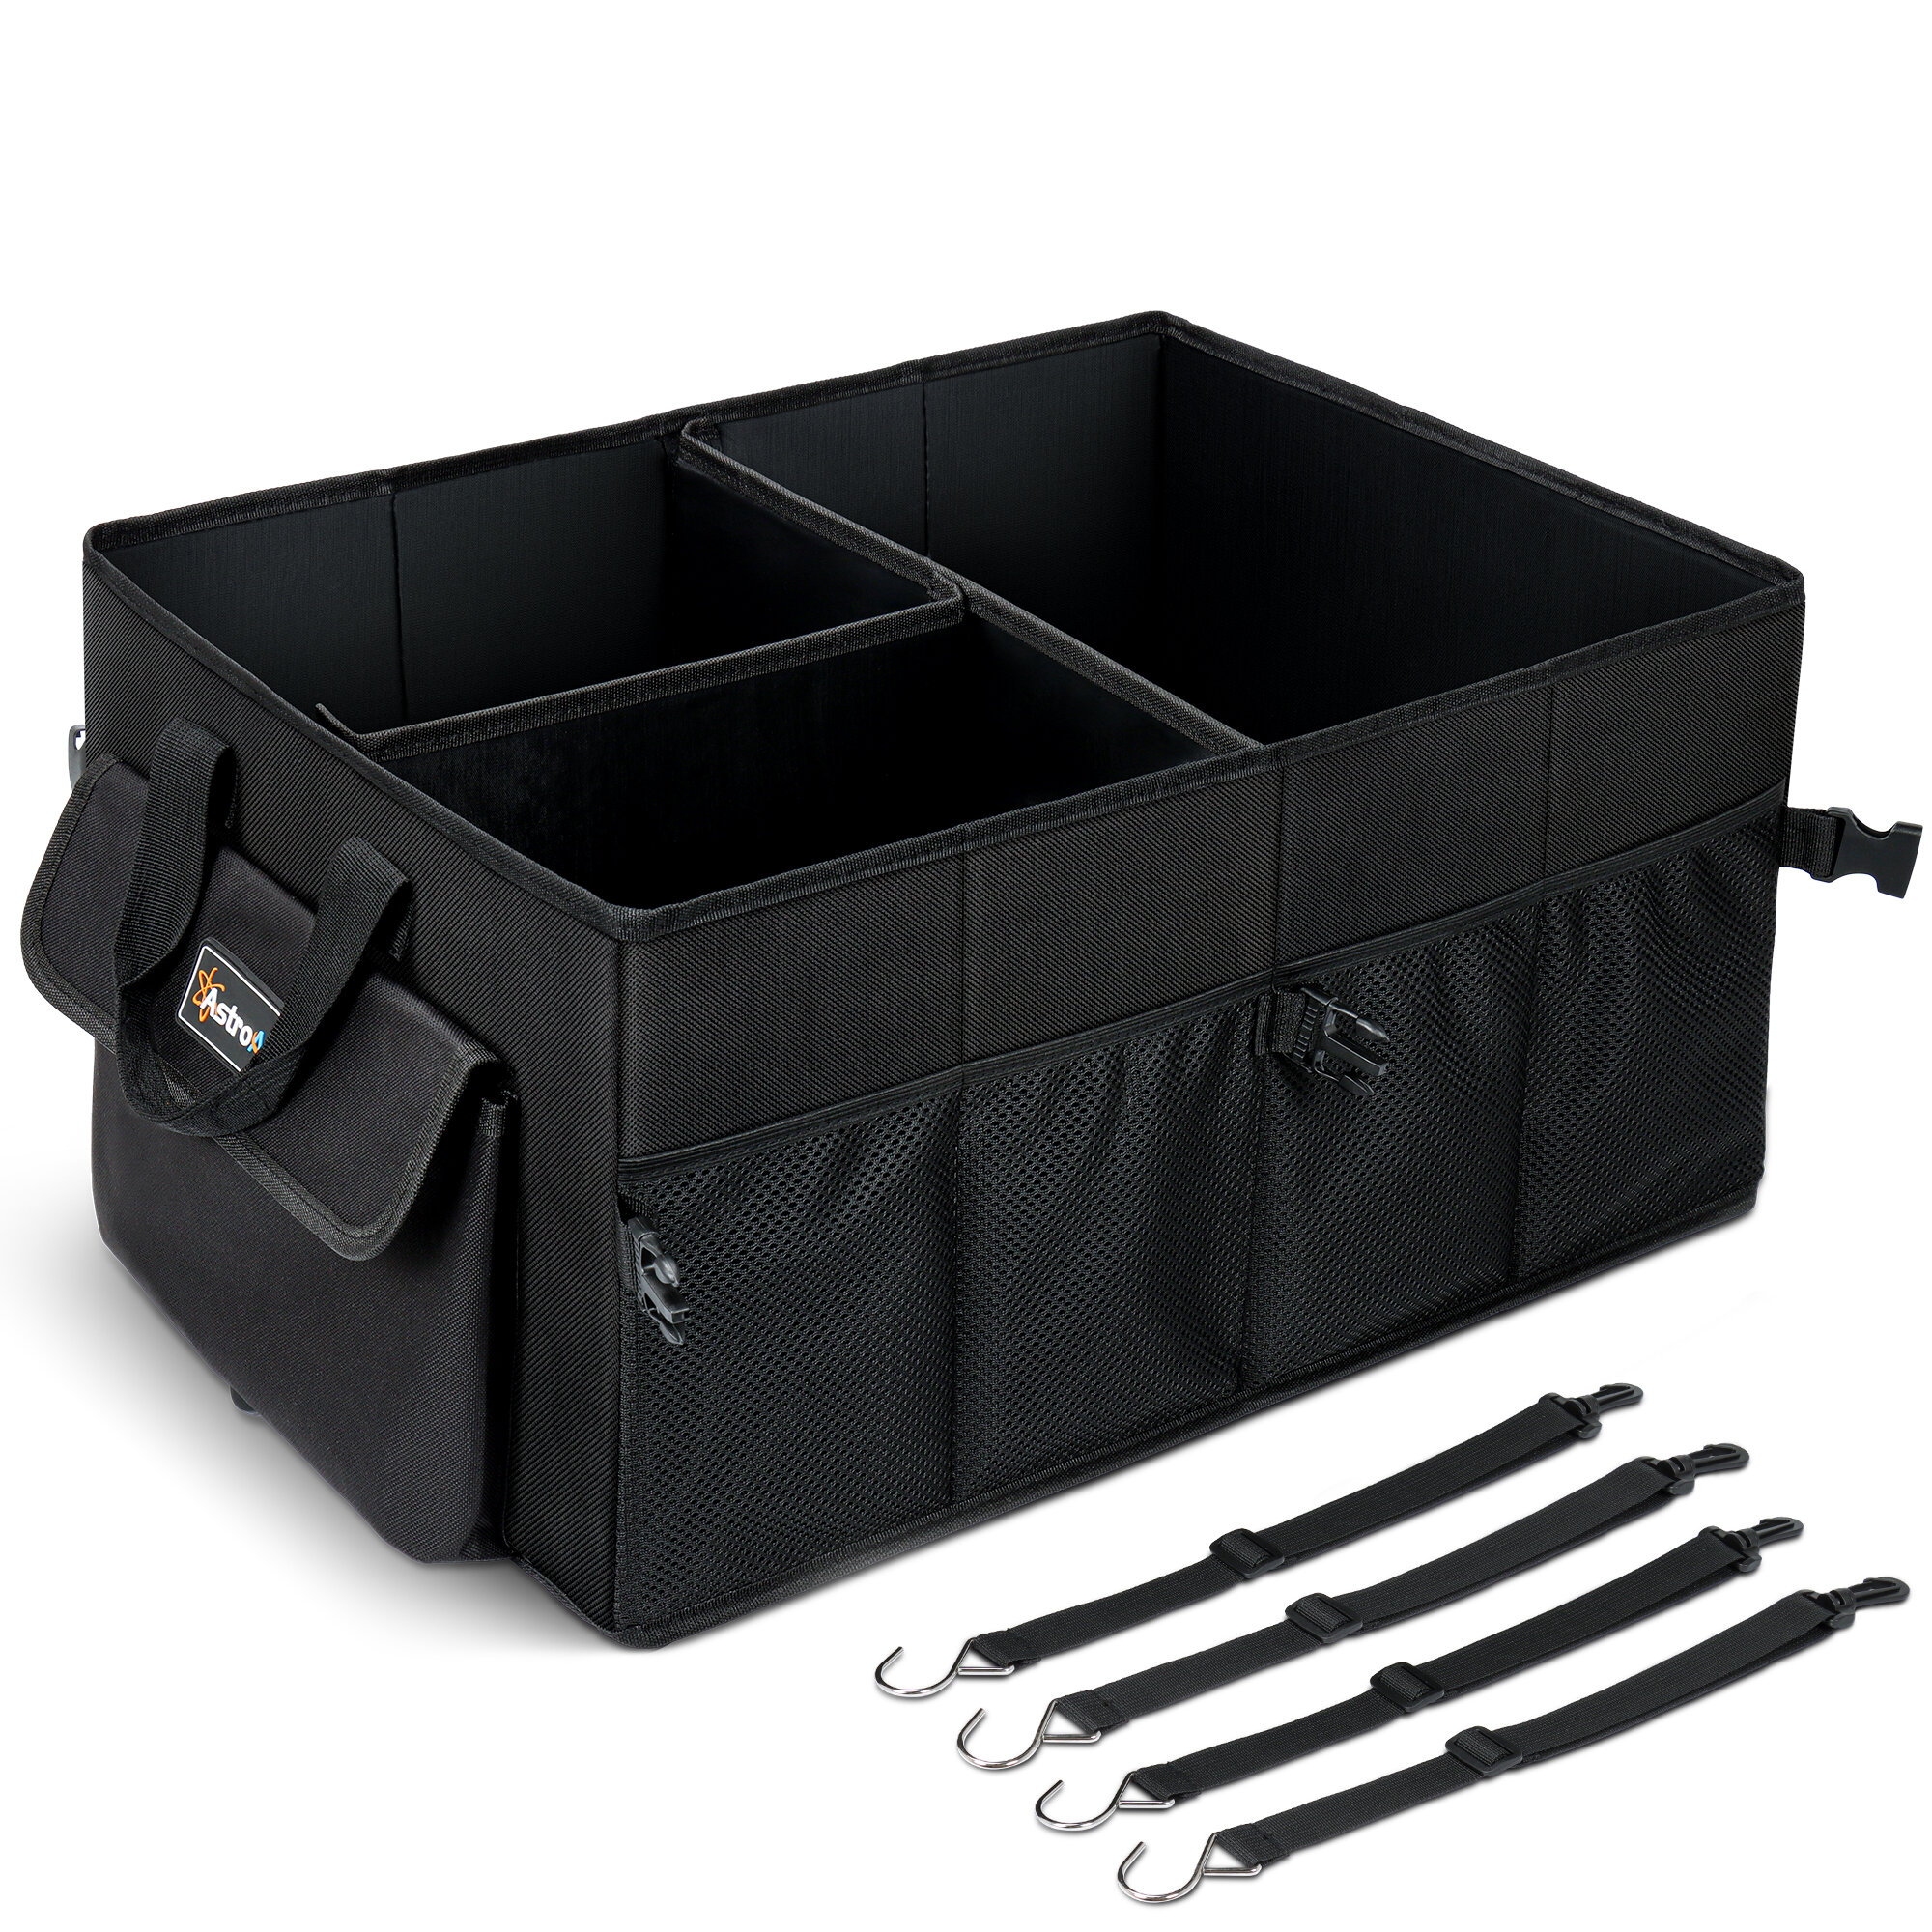 Portable UTENEW Car Trunk Organizer Collapsible SUV Cargo Storage 3 Compartments Space Saver Containers Two Handles and Side Pockets 